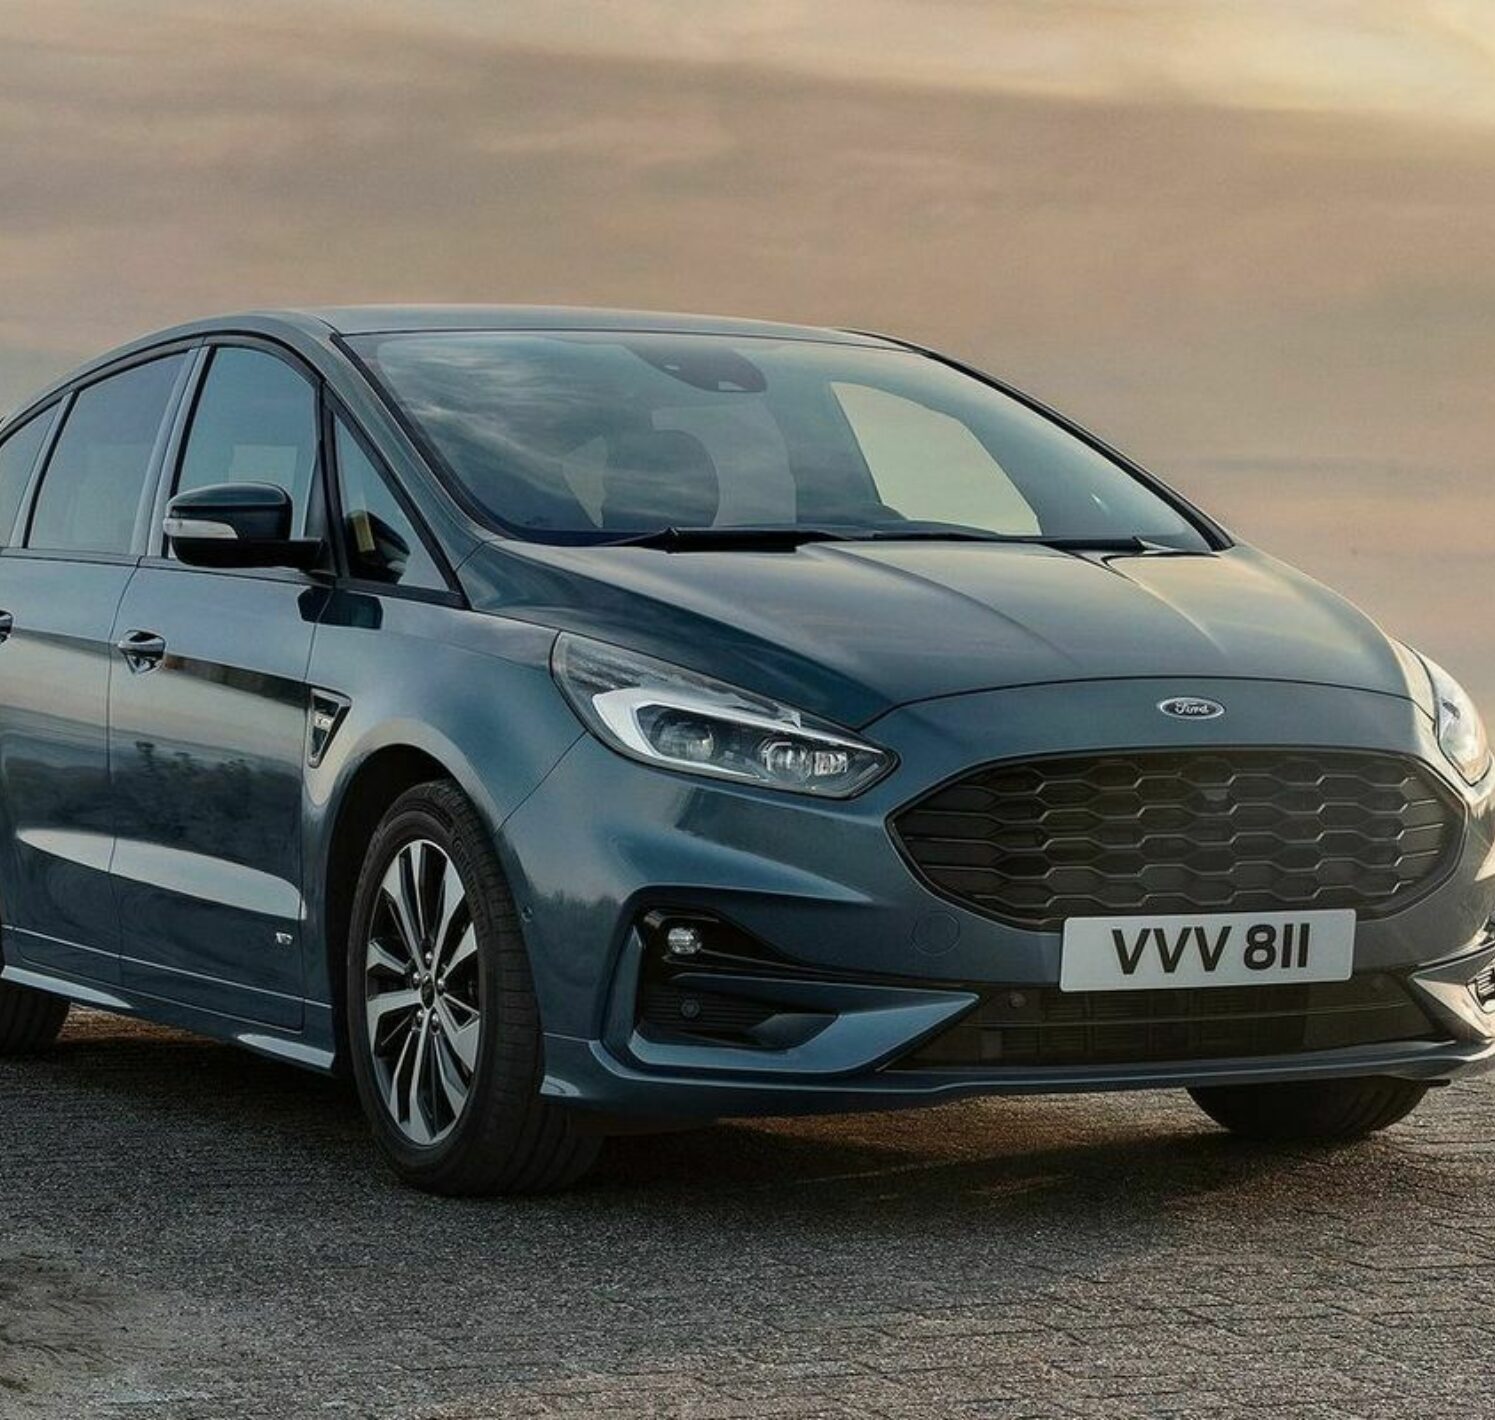 https://autofilter.sk/assets/images/s-max/gallery/ford-s-max-2020_07-galeria.jpeg - obrazok